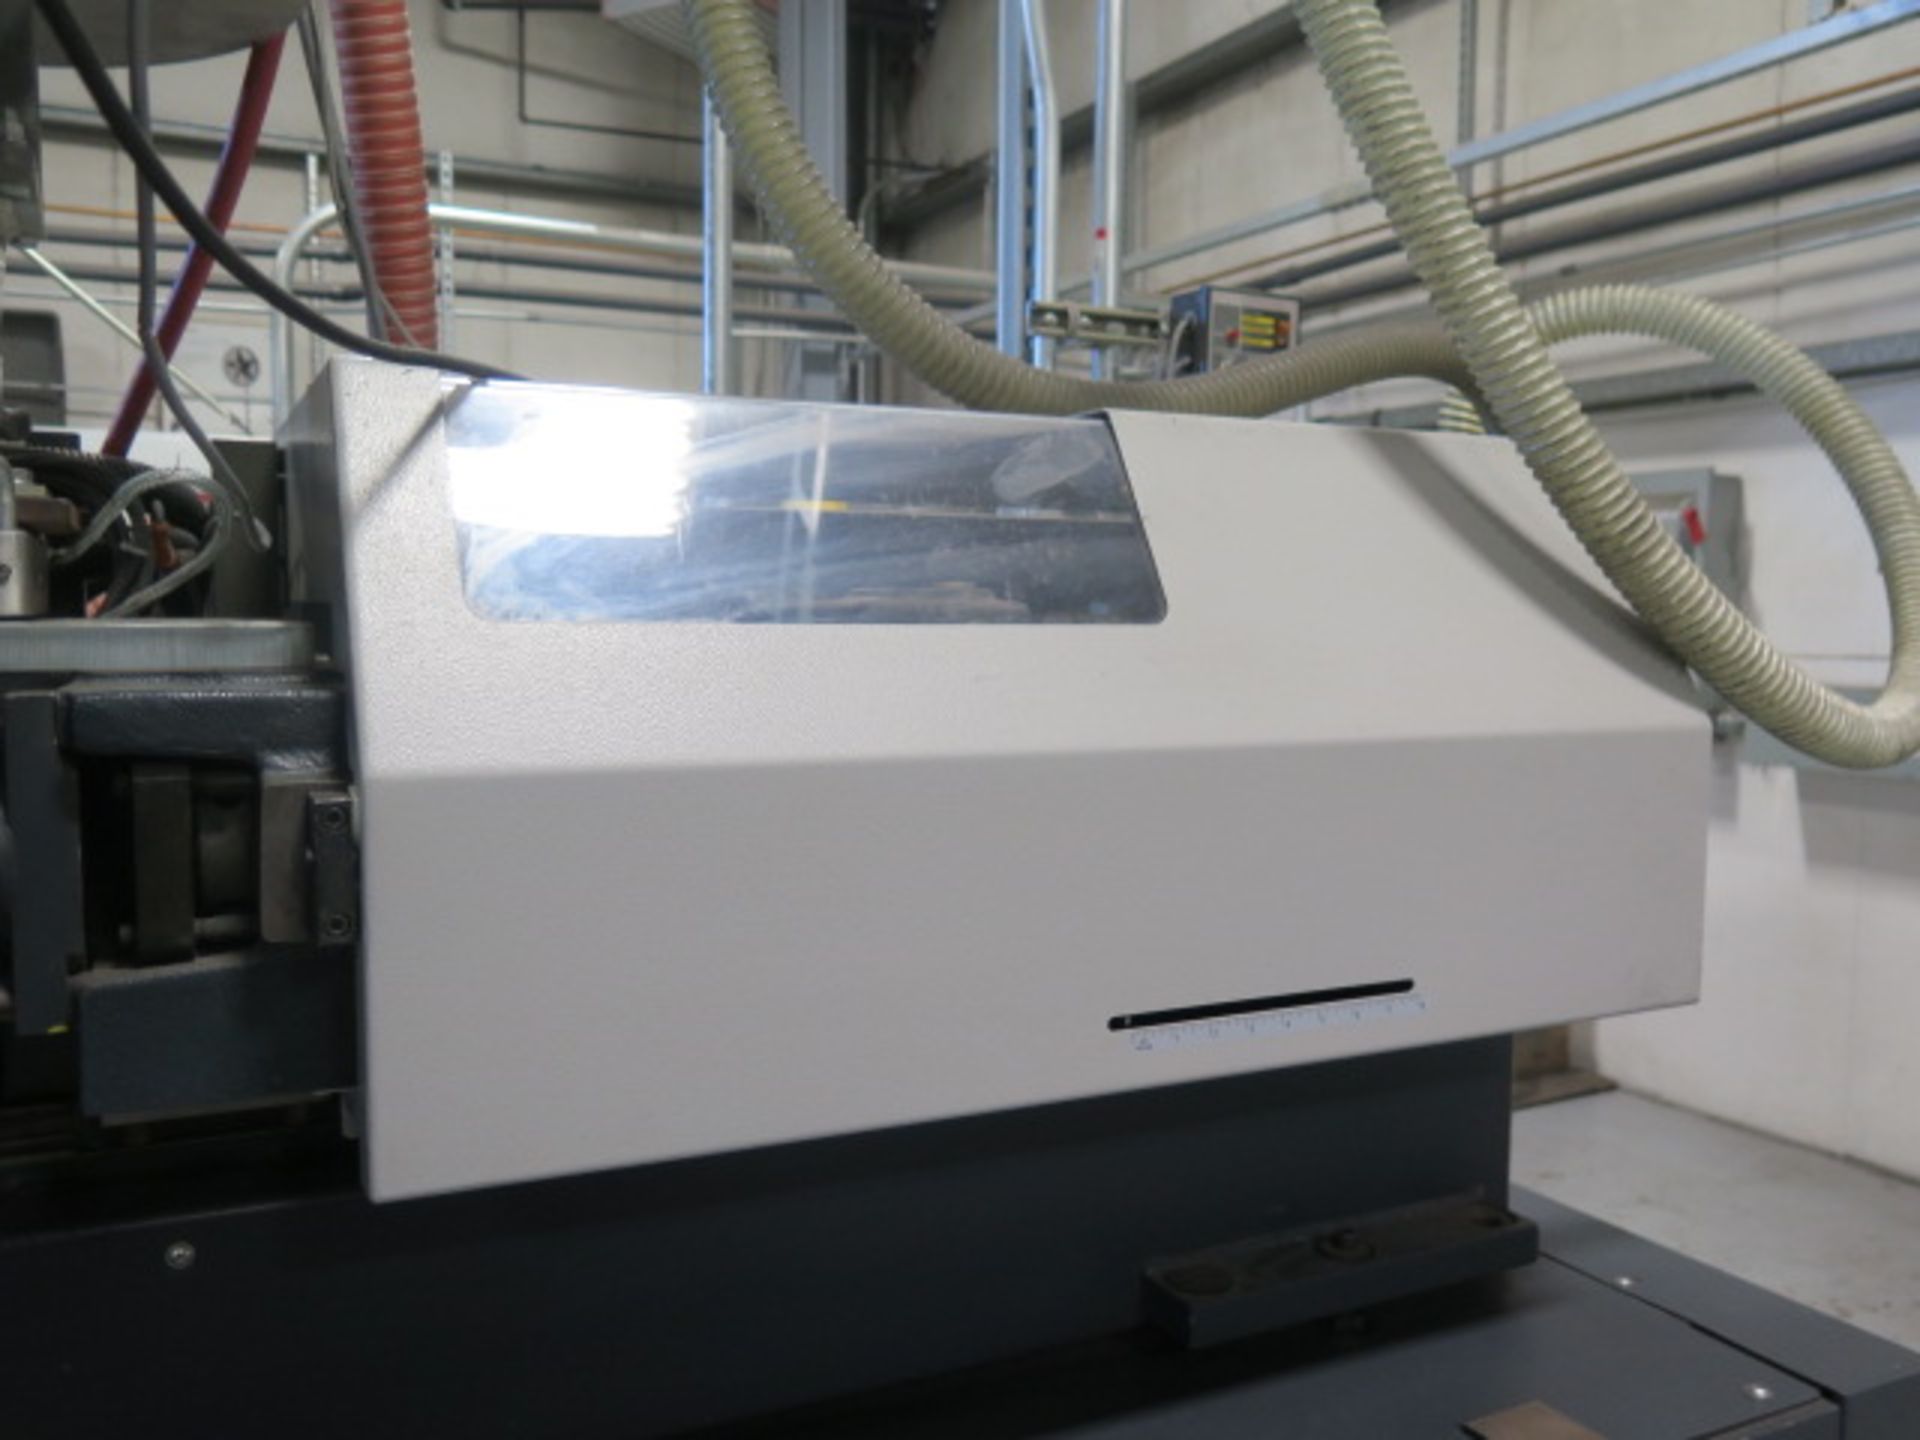 2000 Demag Ergotech Concept 1100/470-430 110-Ton Plastic Injection Molding s/n 7173-0068, SOLD AS IS - Image 12 of 16